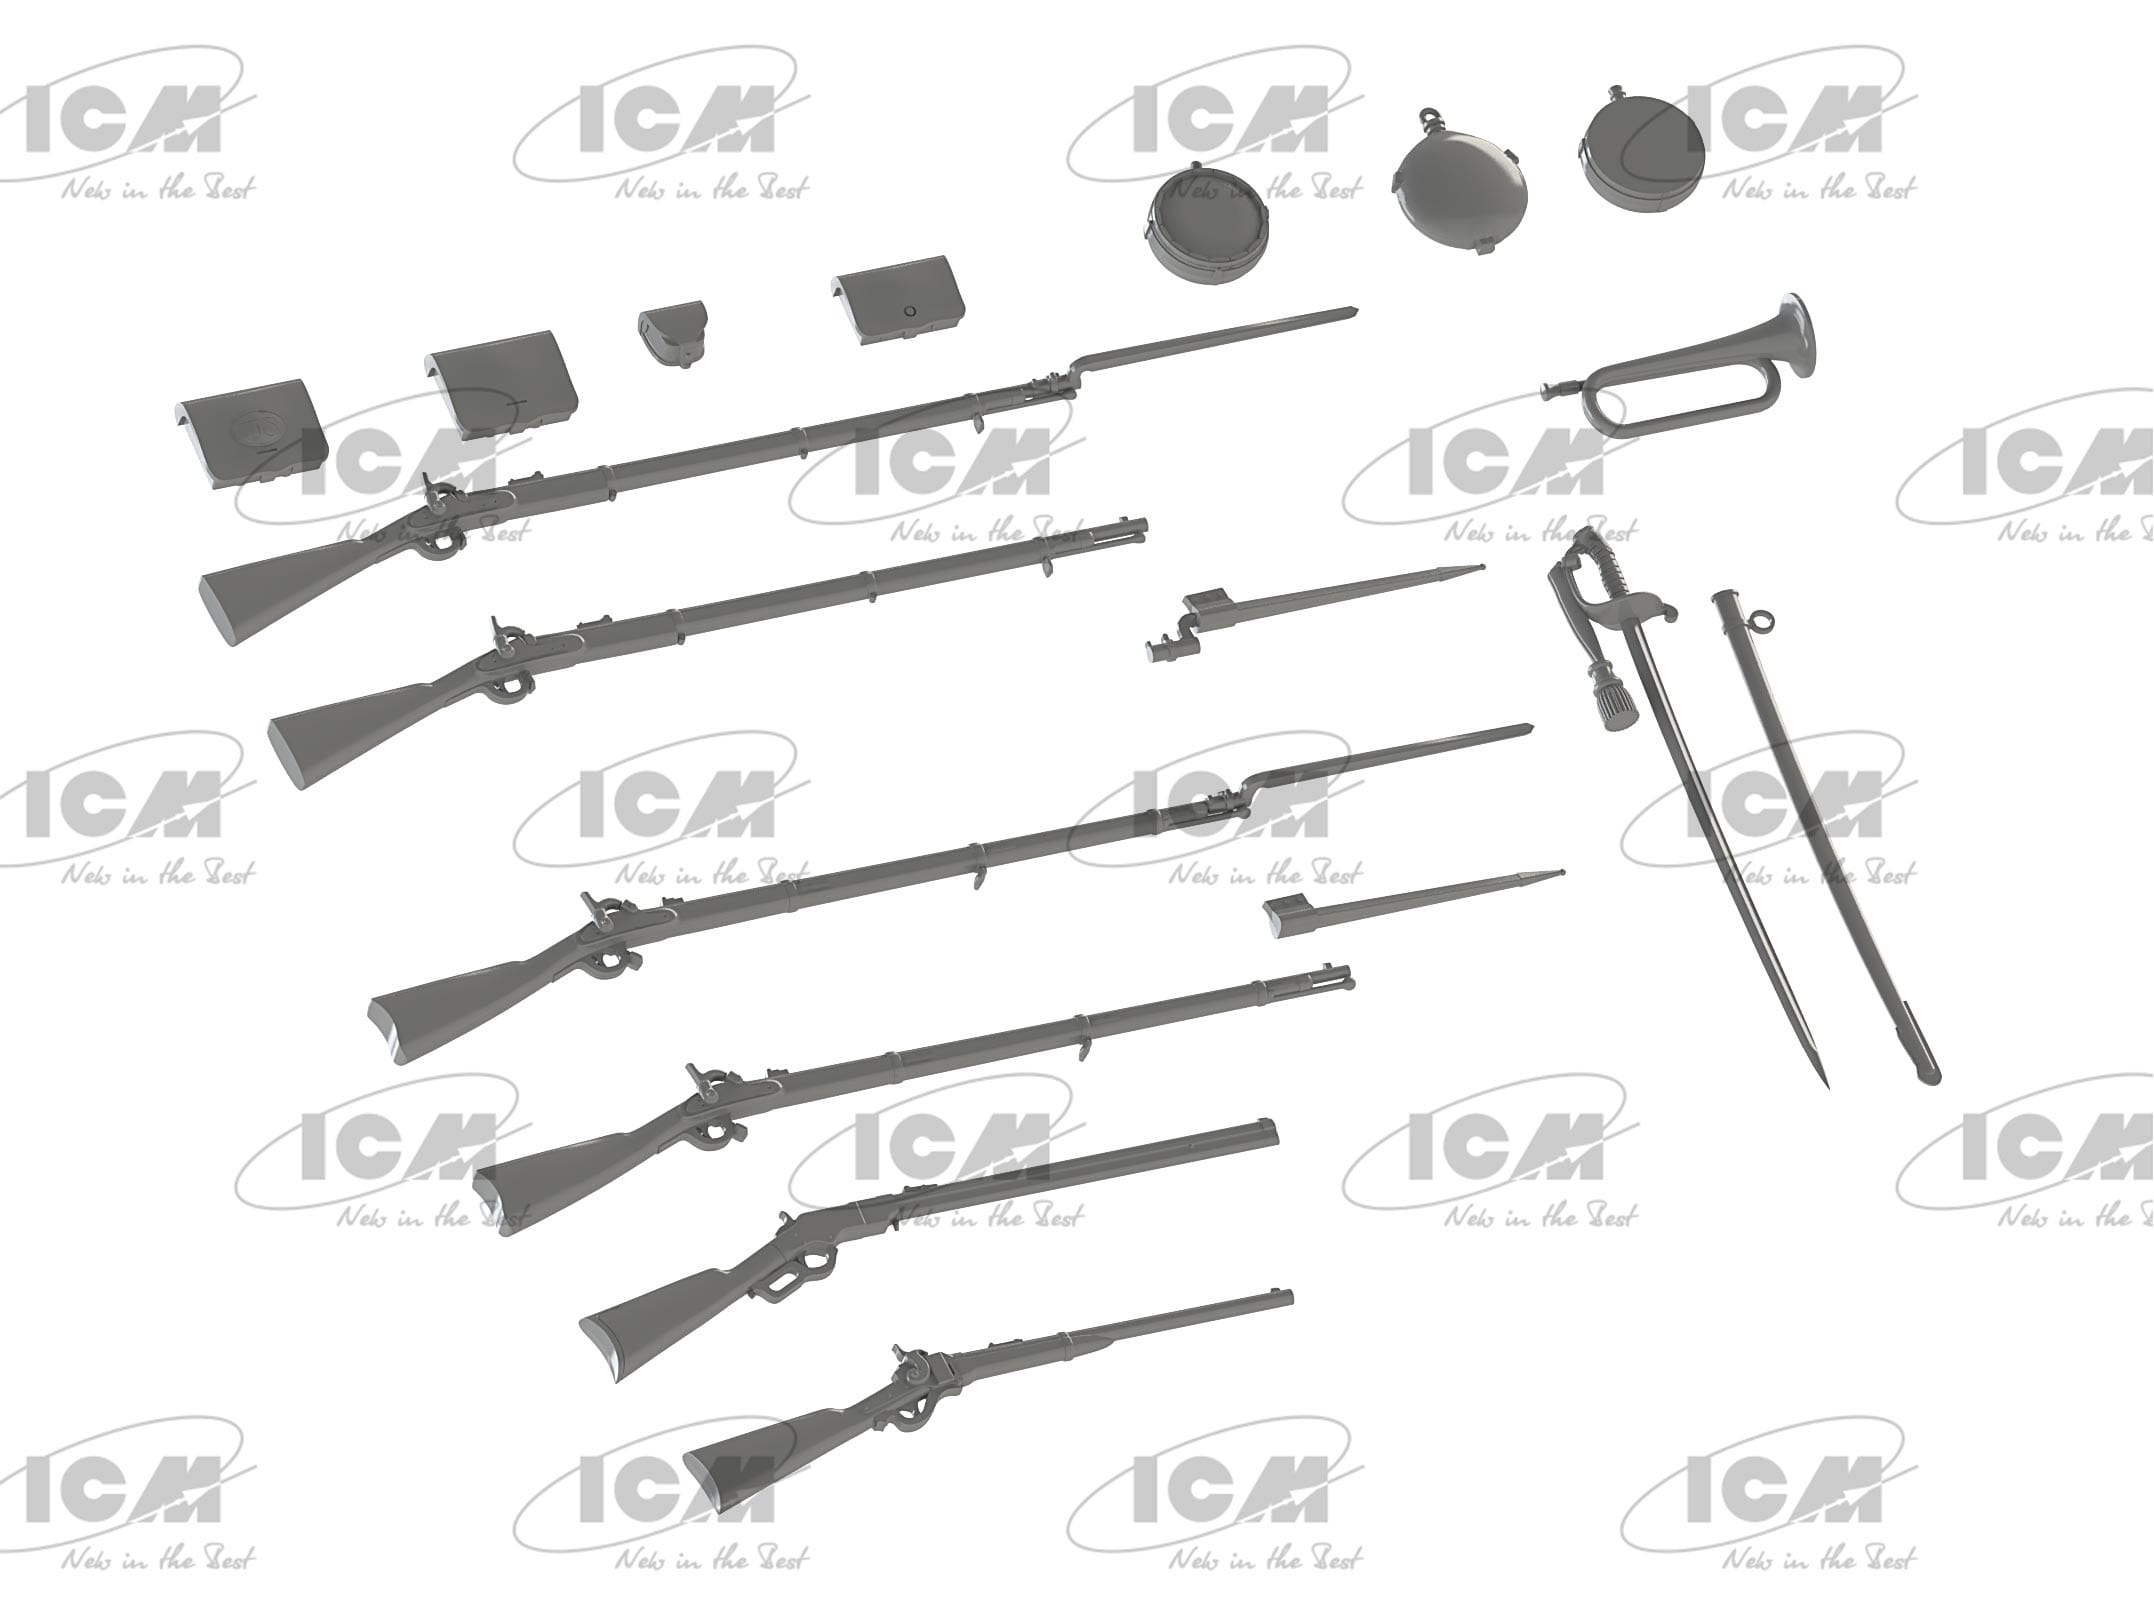 ICM 1/35 American Civil War Weapons & Equipment Icm35022 for sale online